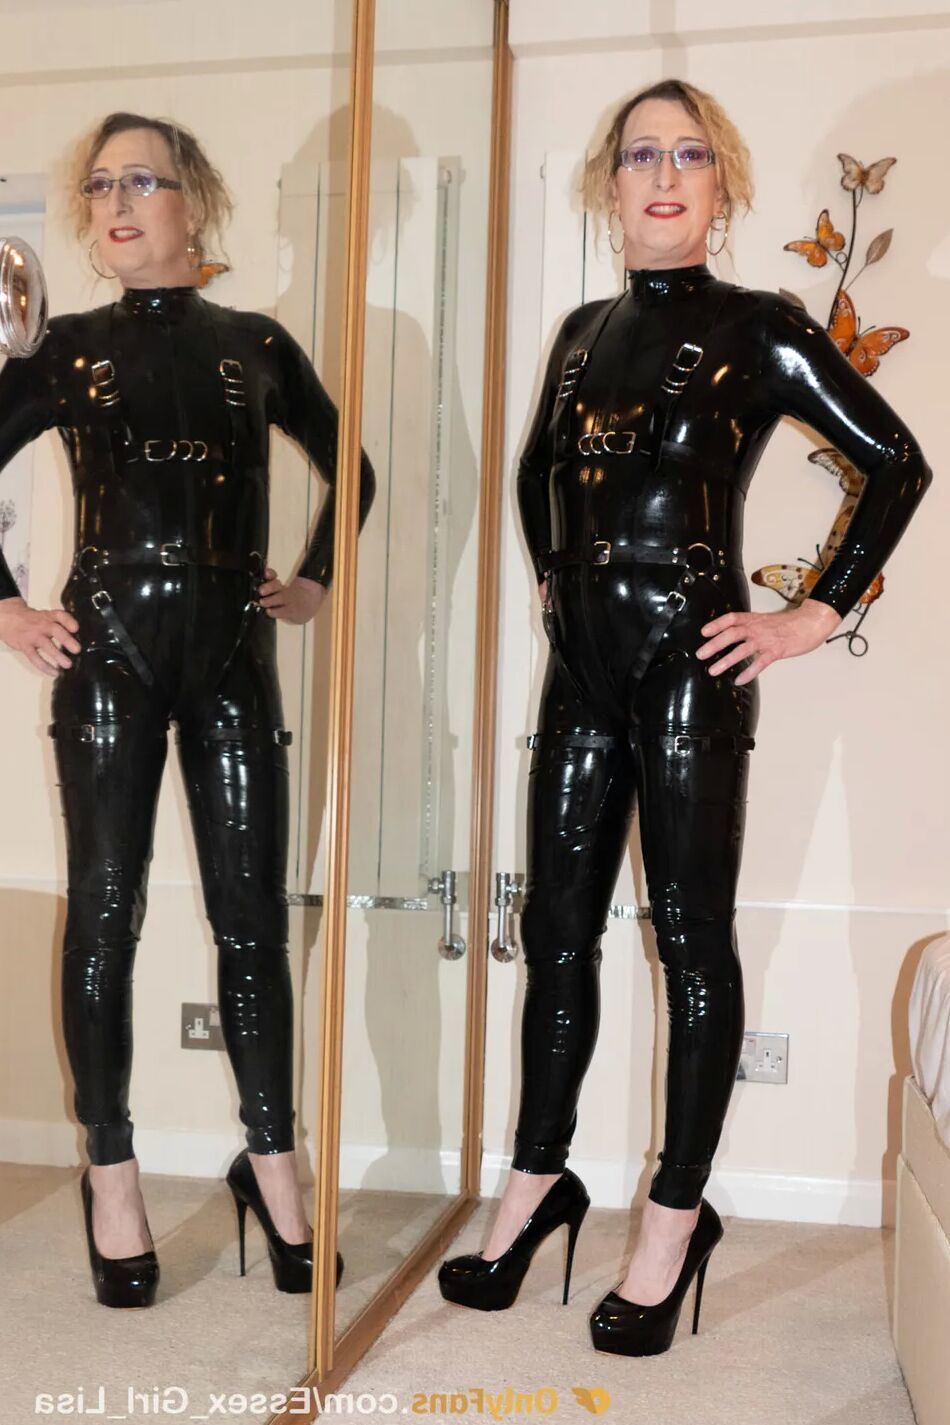 15 Pics Essex Girl Lisa feeling dominant in my latex catsuit